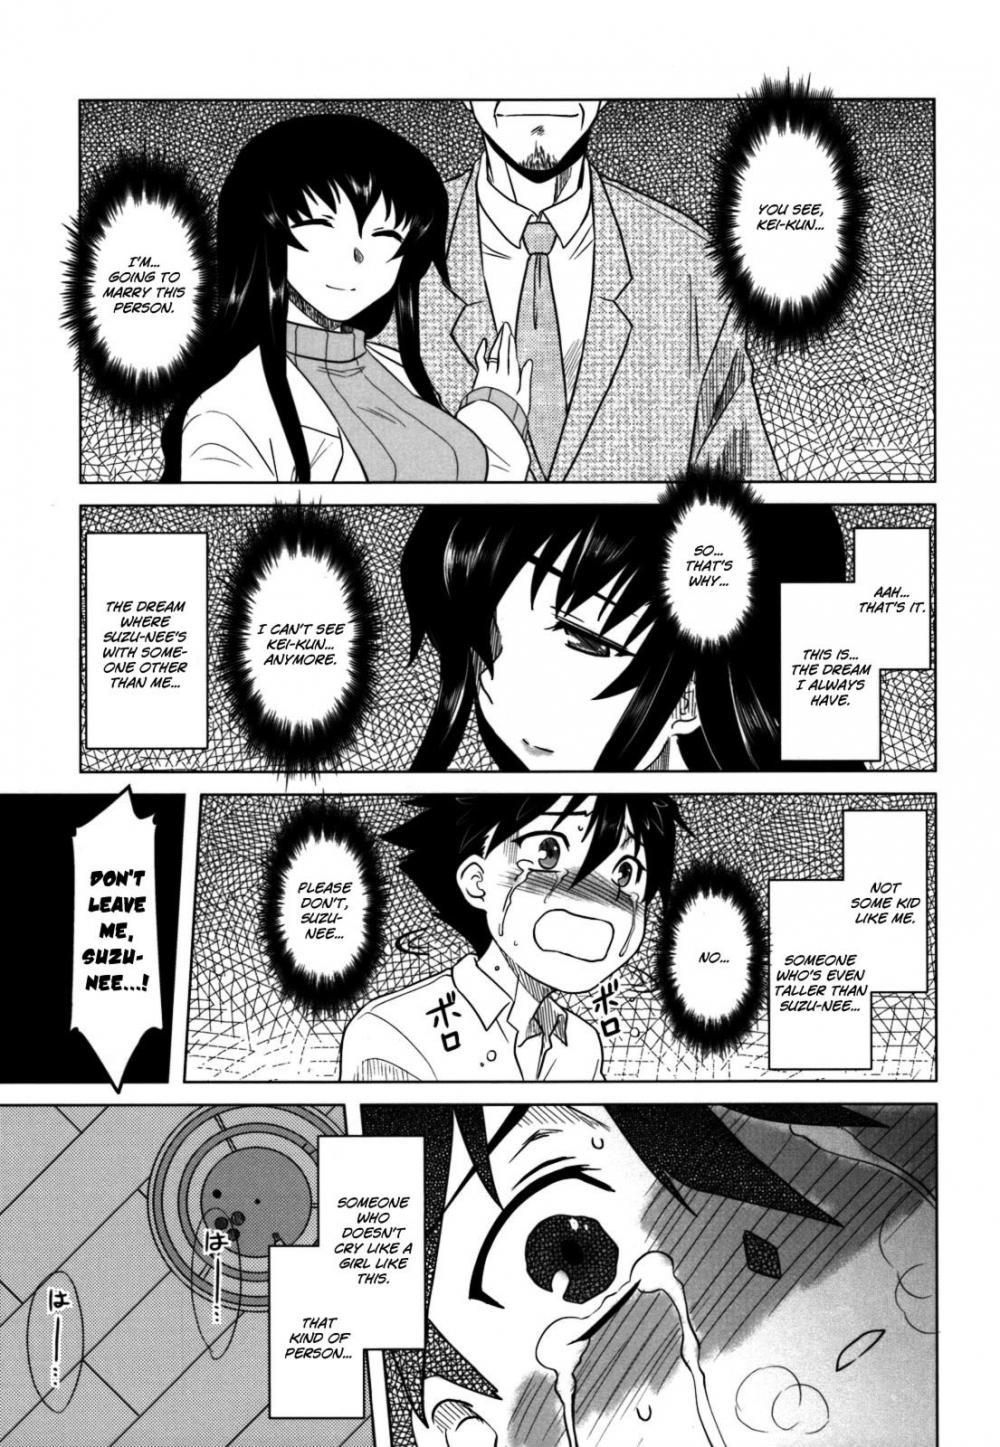 Hentai Manga Comic-Whenever You Touch Me-Chapter 11-1